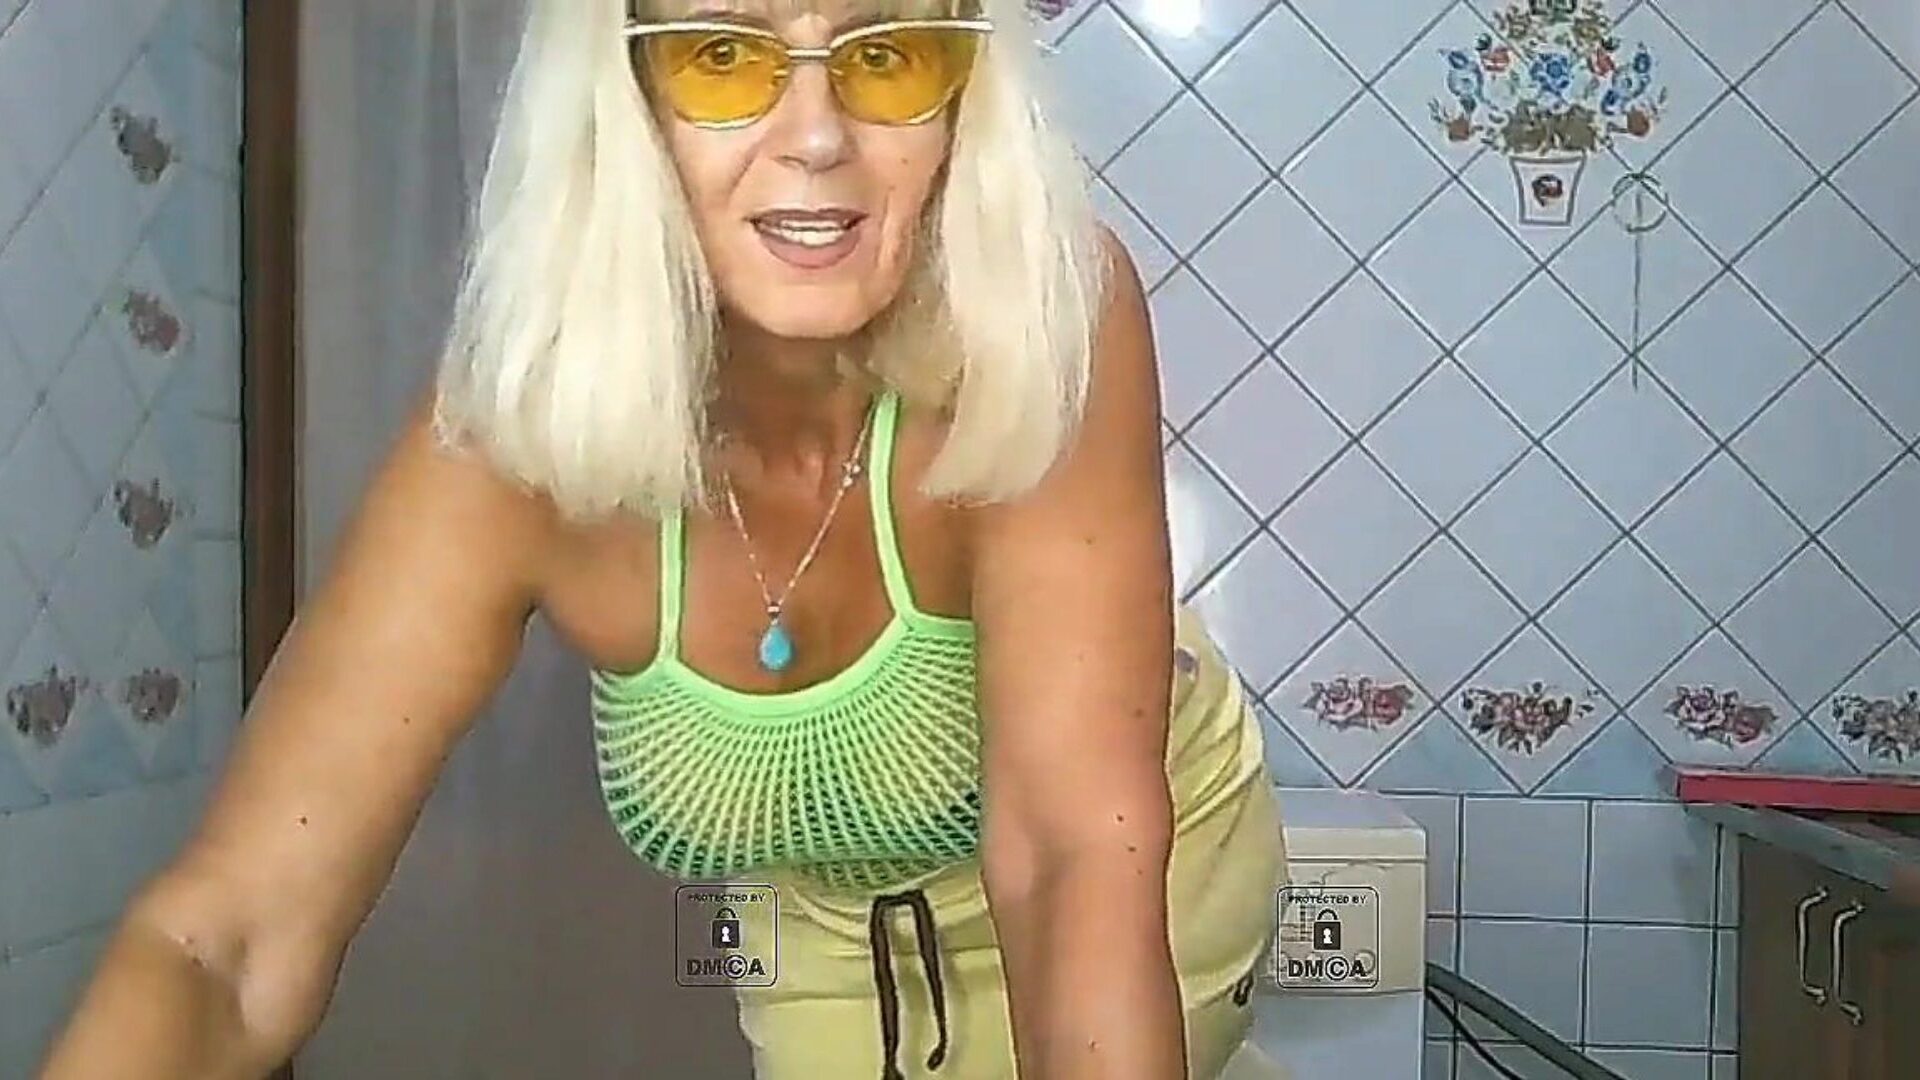 Mature minx, washing machine and striptease And afresh a hawt housewife teases on the washing machine in front of the camera like a blond and concludes up with a striptease in lace pants and nylon nylons